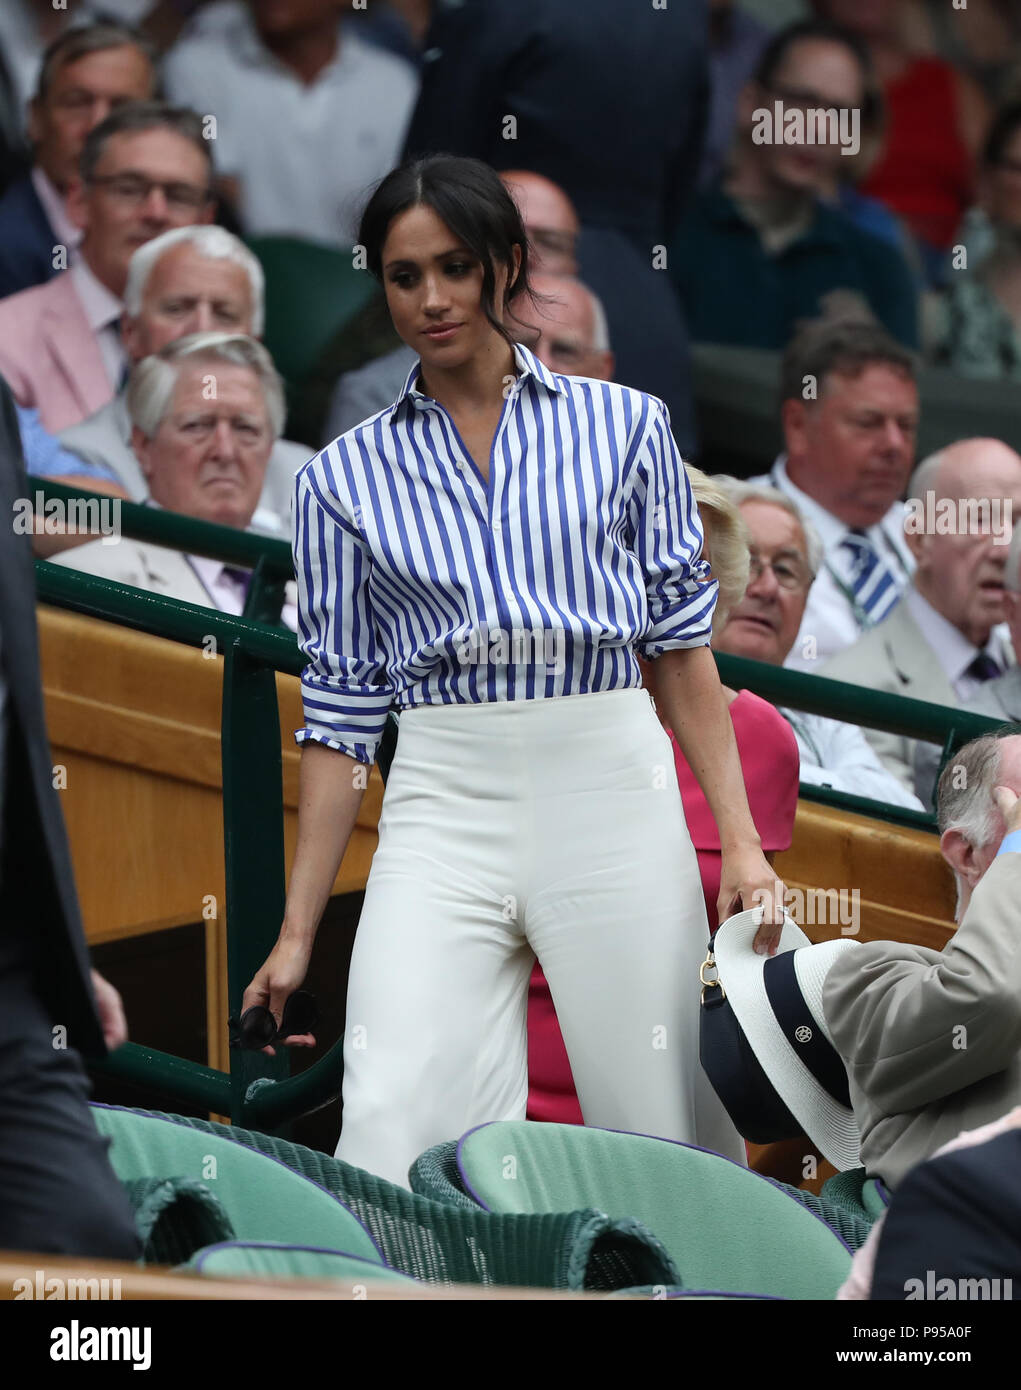 London, UK. 14th July 2018. Meghan Markle, Duchess of Sussex, watching the  conclusion of the Rafael Nadal and Novak Djokovic match, before the Ladies  Final between Angelique Kerber and Serena Williams. Ladies